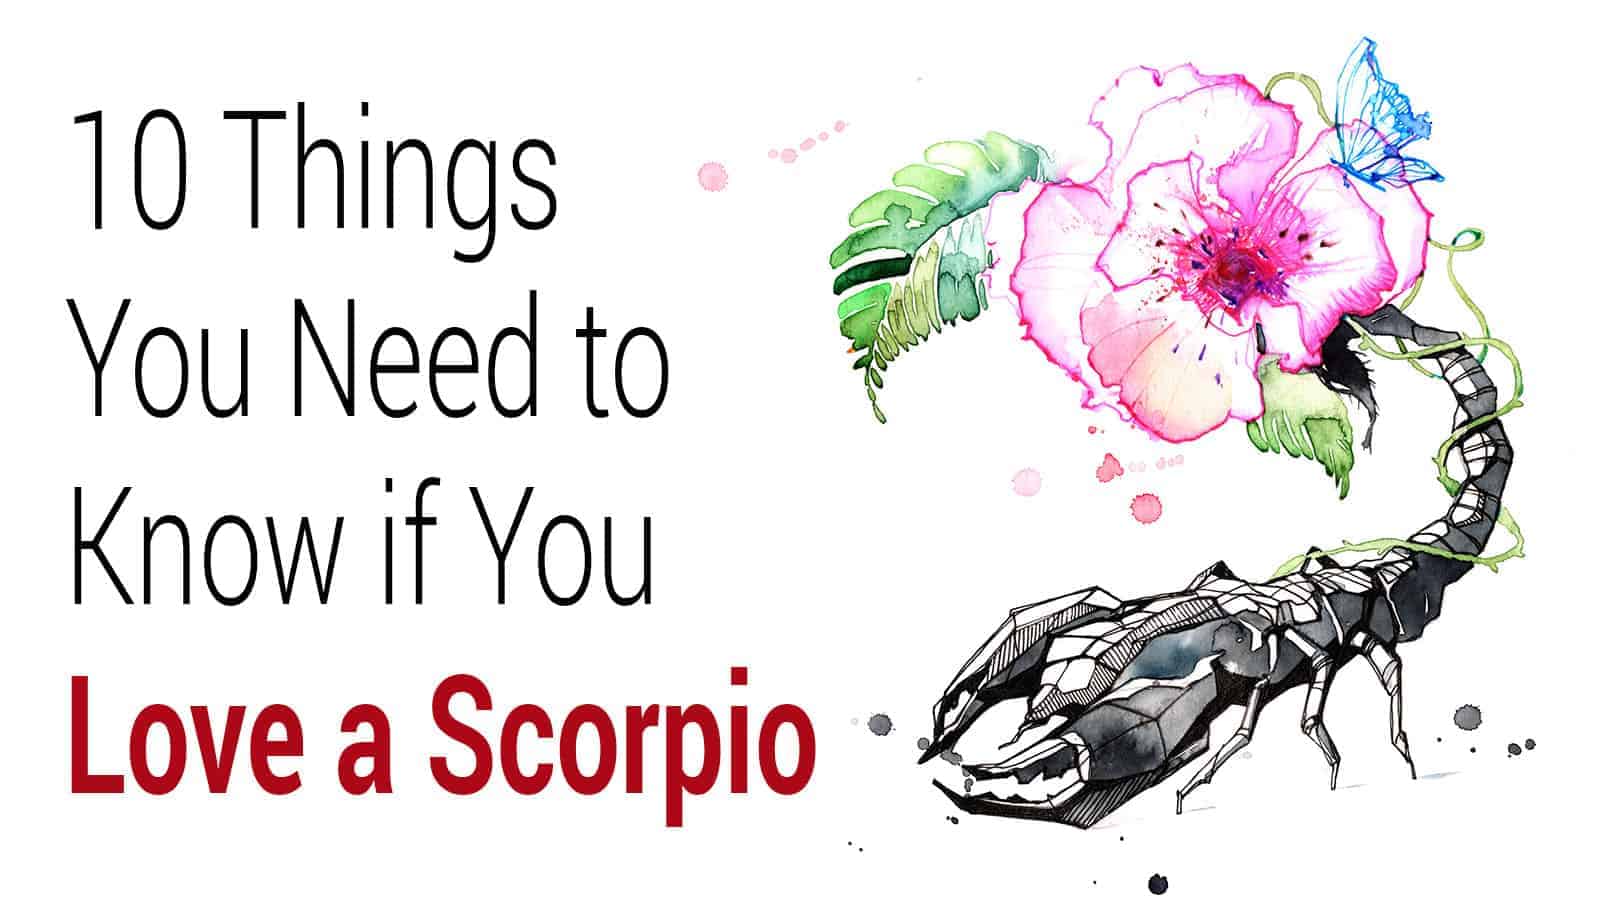 Signs that a scorpio man has feelings for you